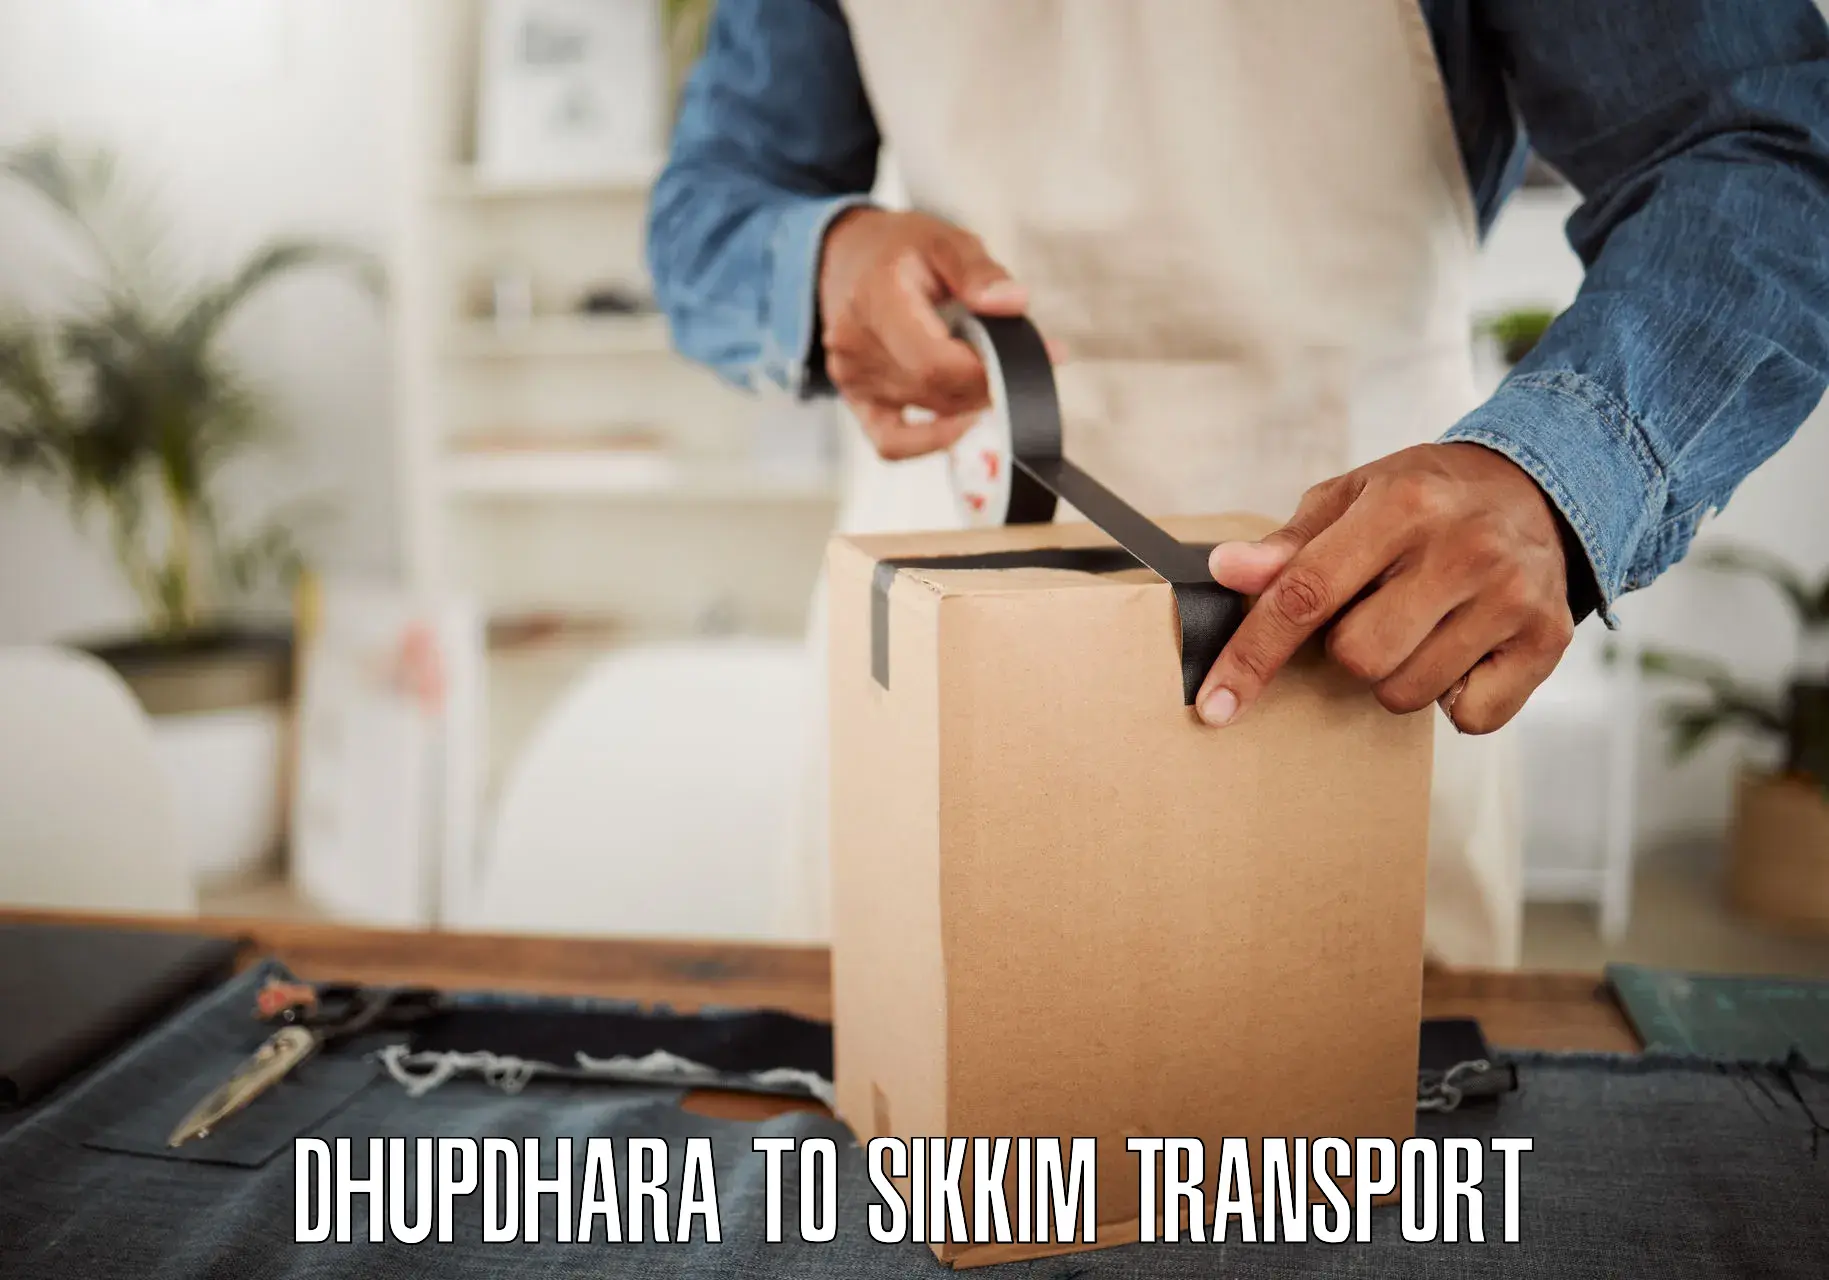 Air freight transport services Dhupdhara to Pelling